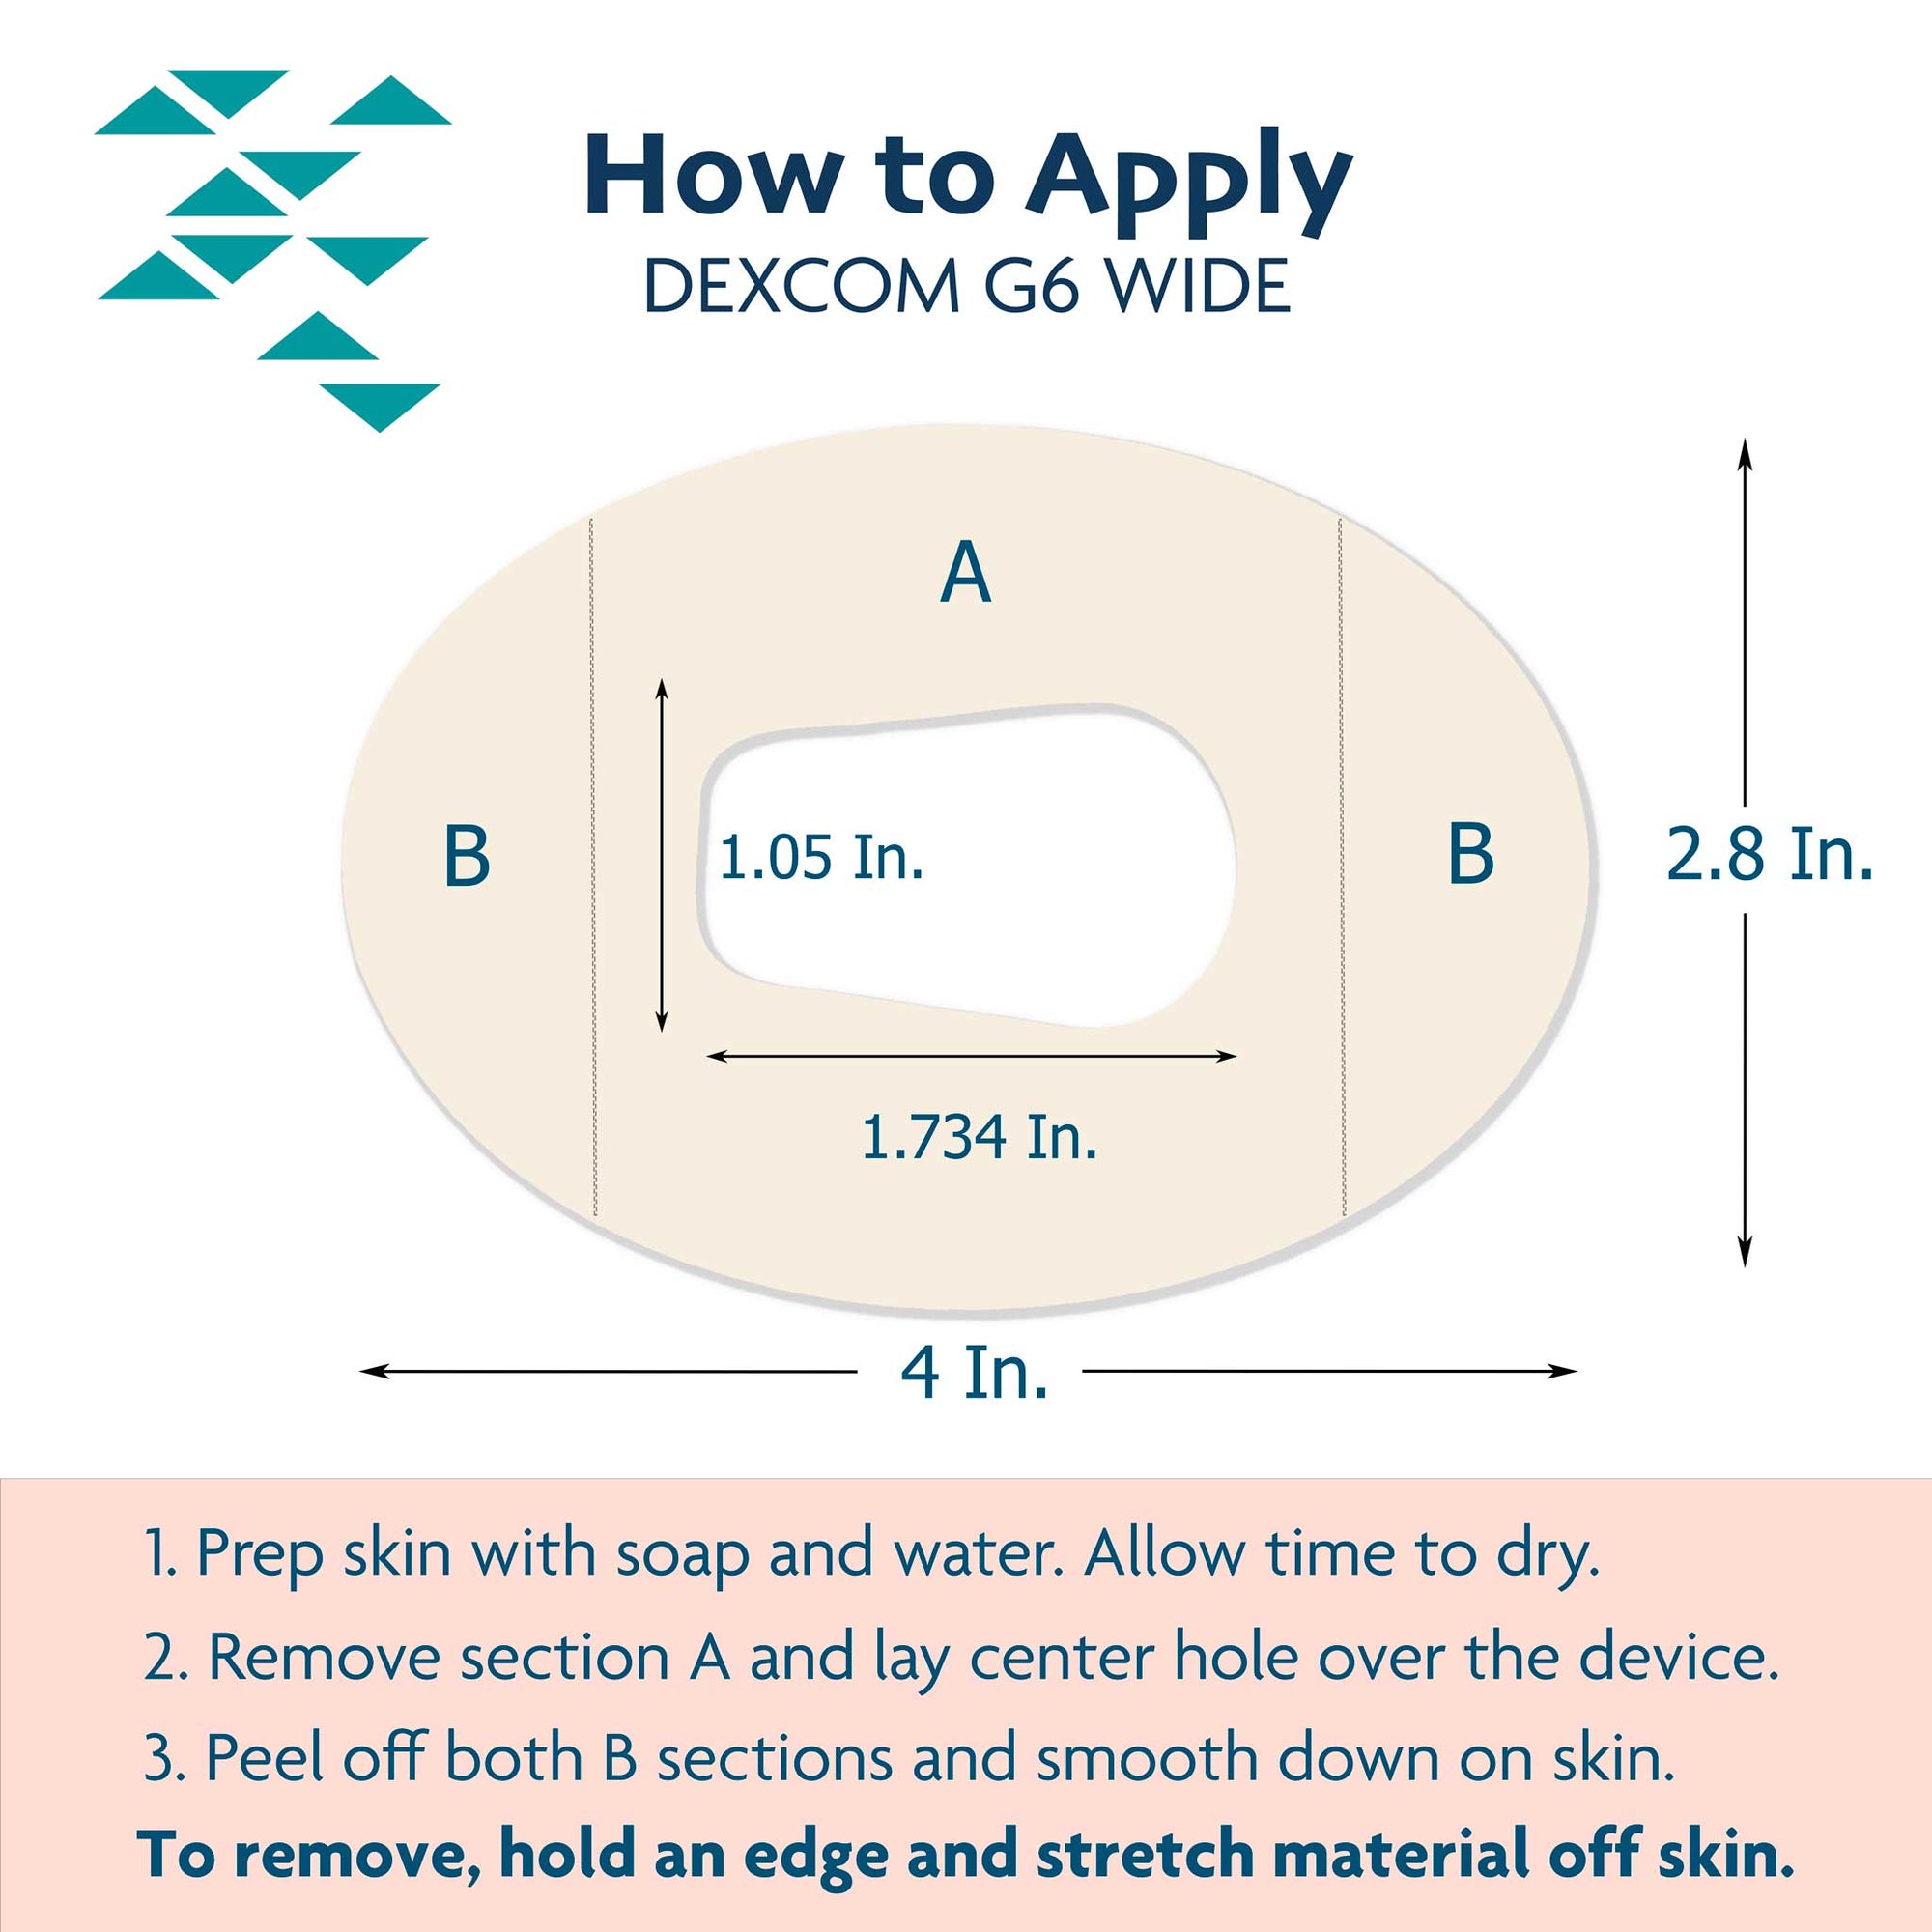 Guide to apply adhesive patch to dexcom cgm site